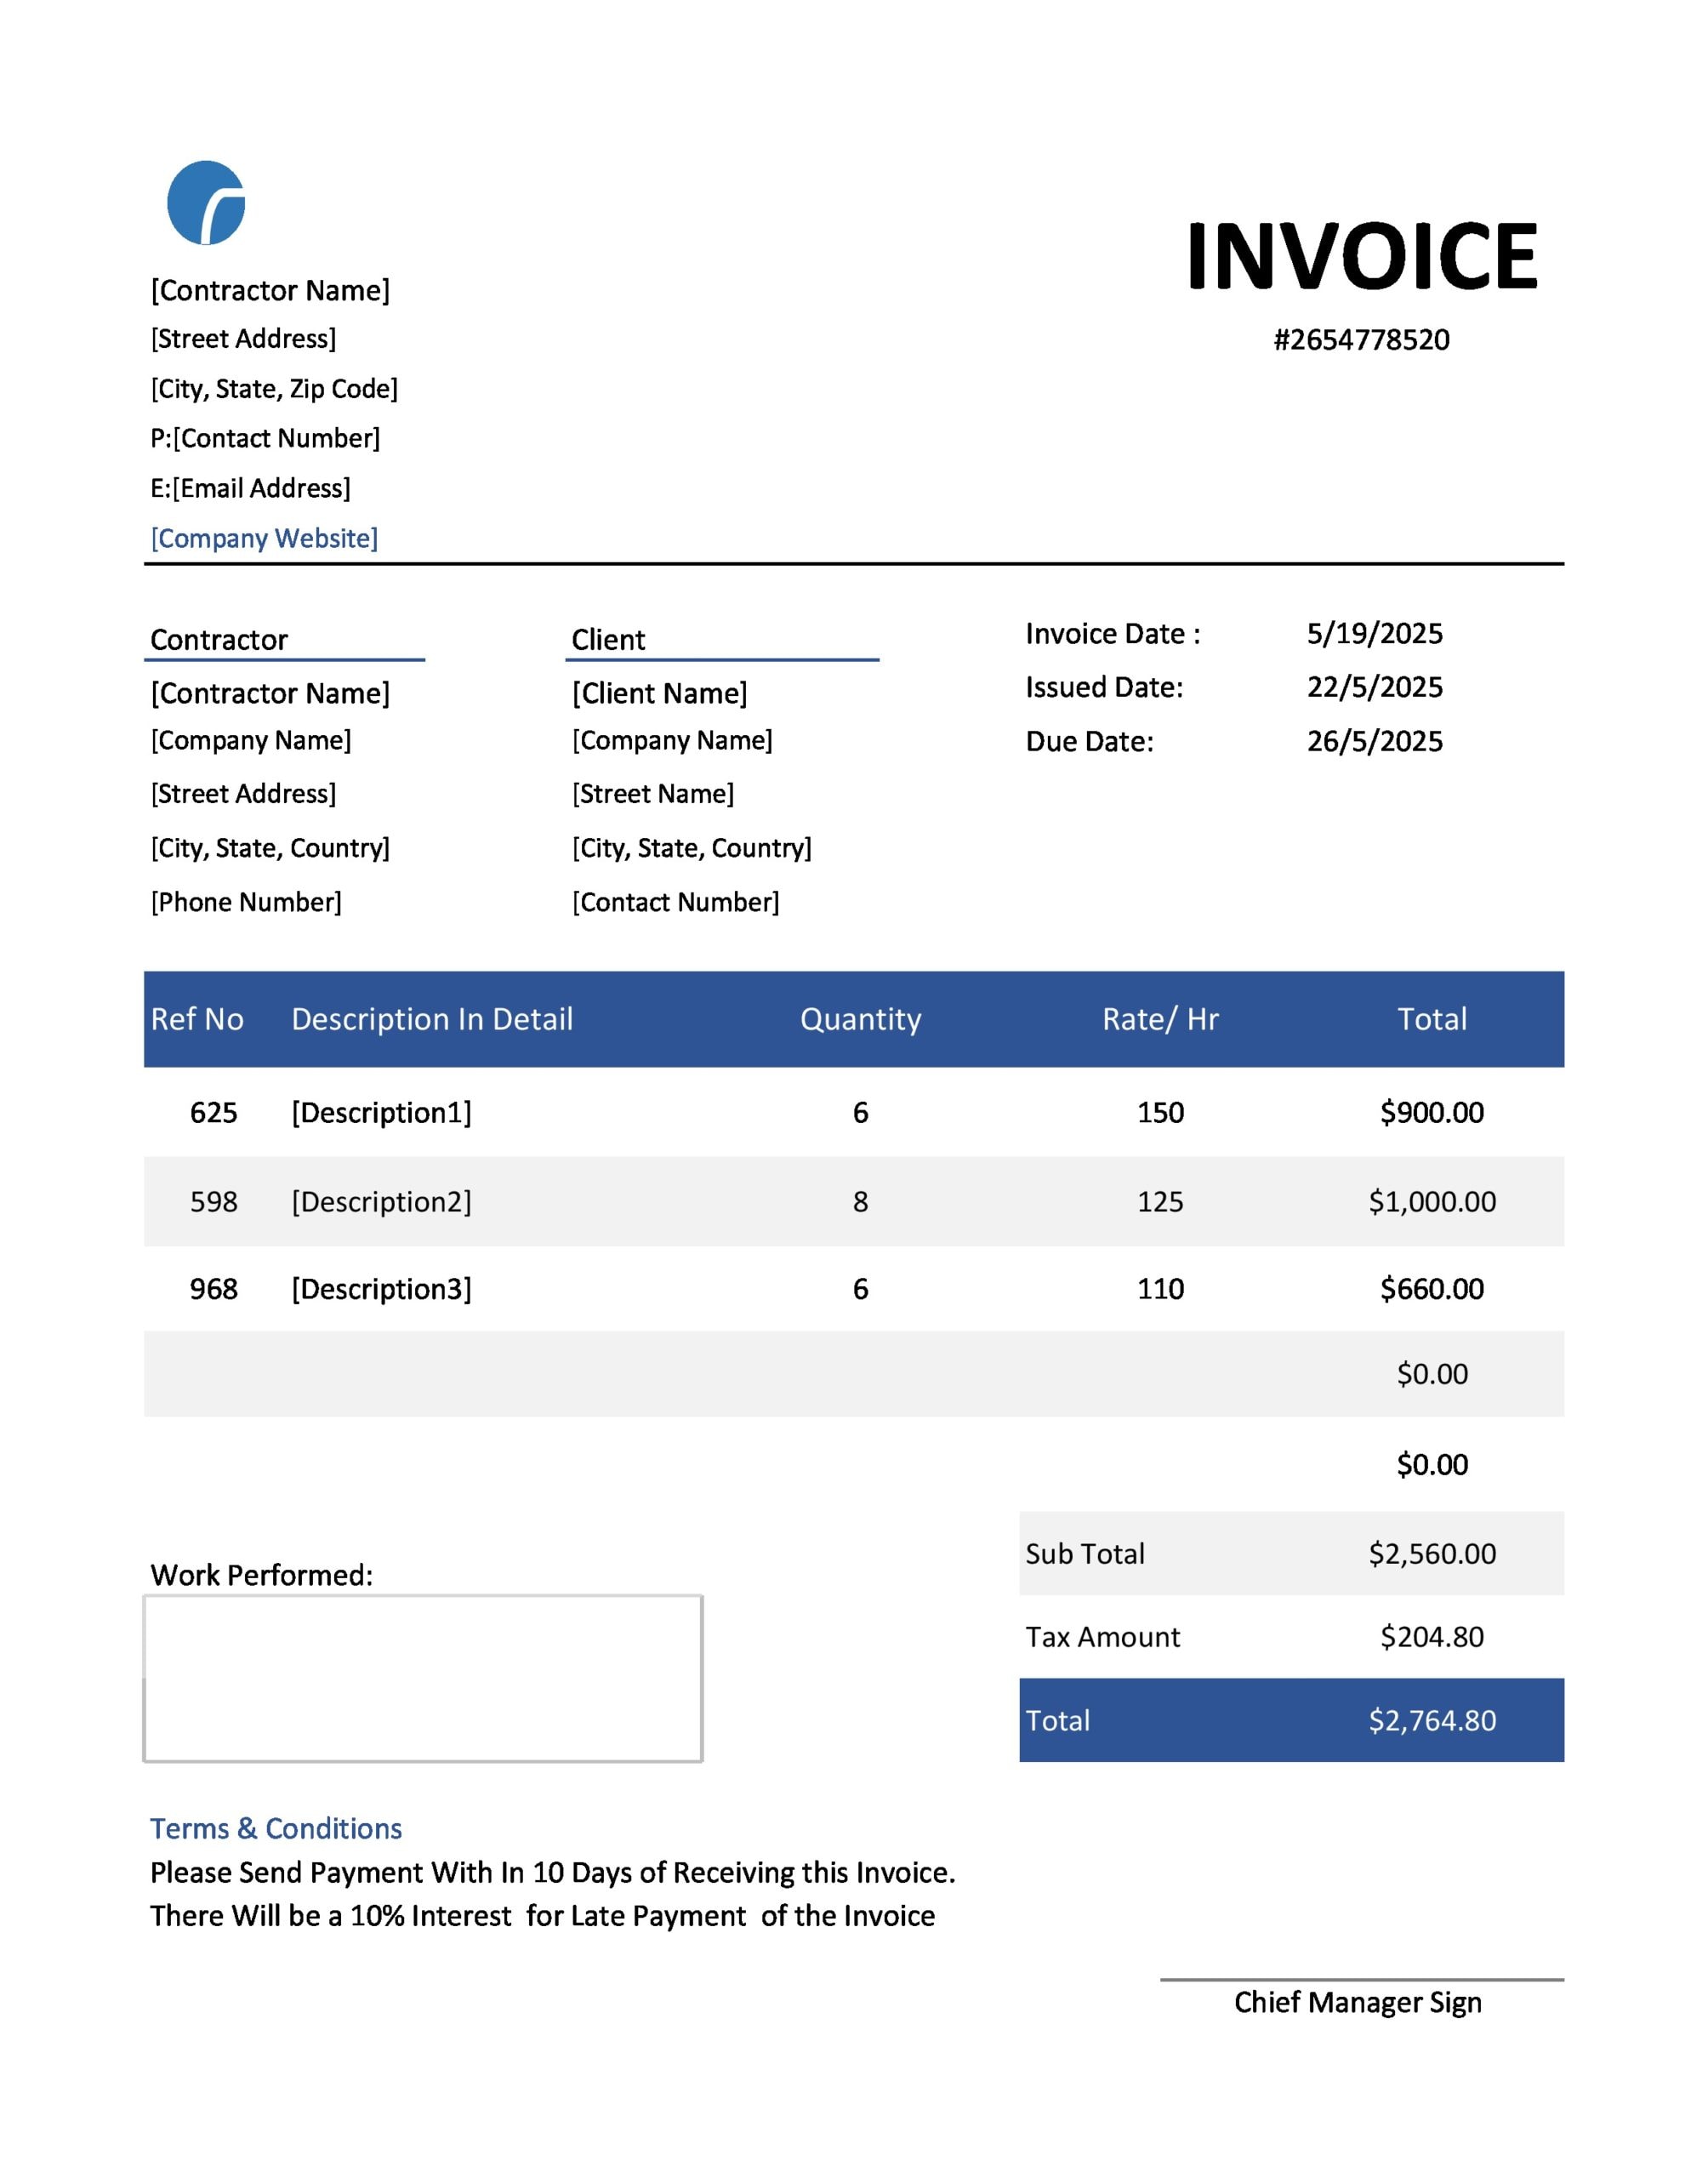 invoice for independent contractor template